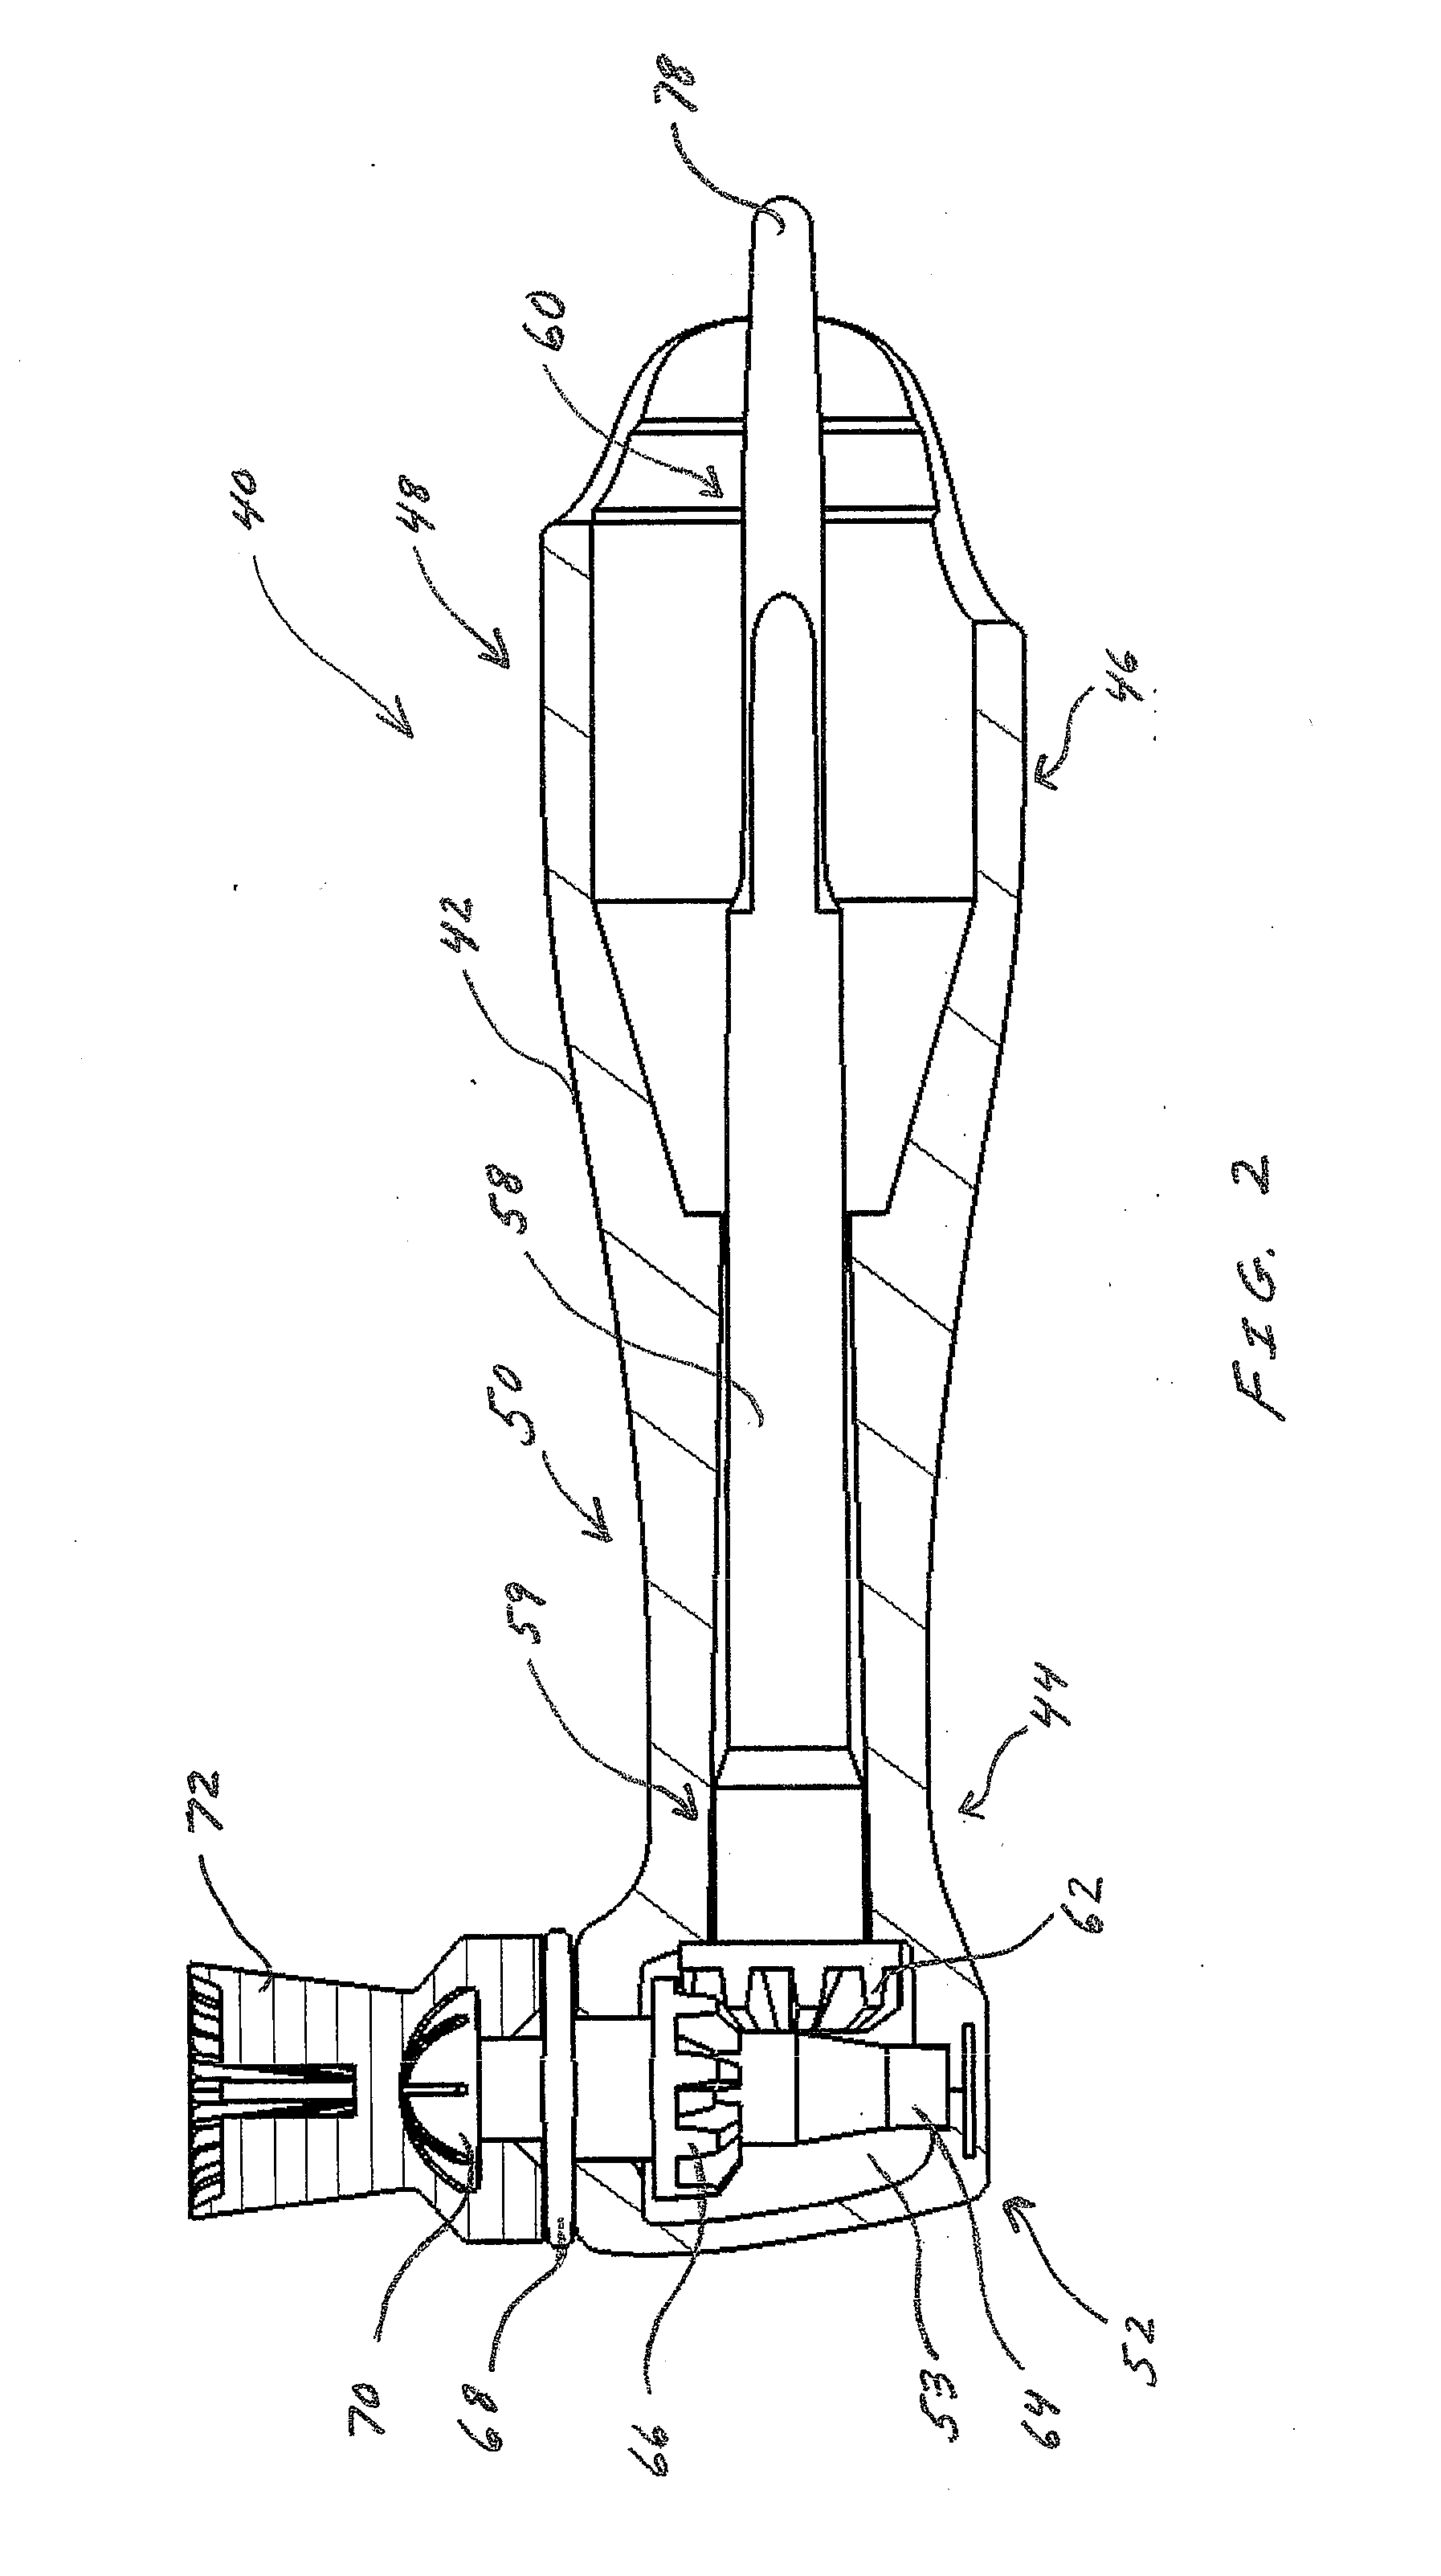 Dental prophylaxis angle and handpiece assembly